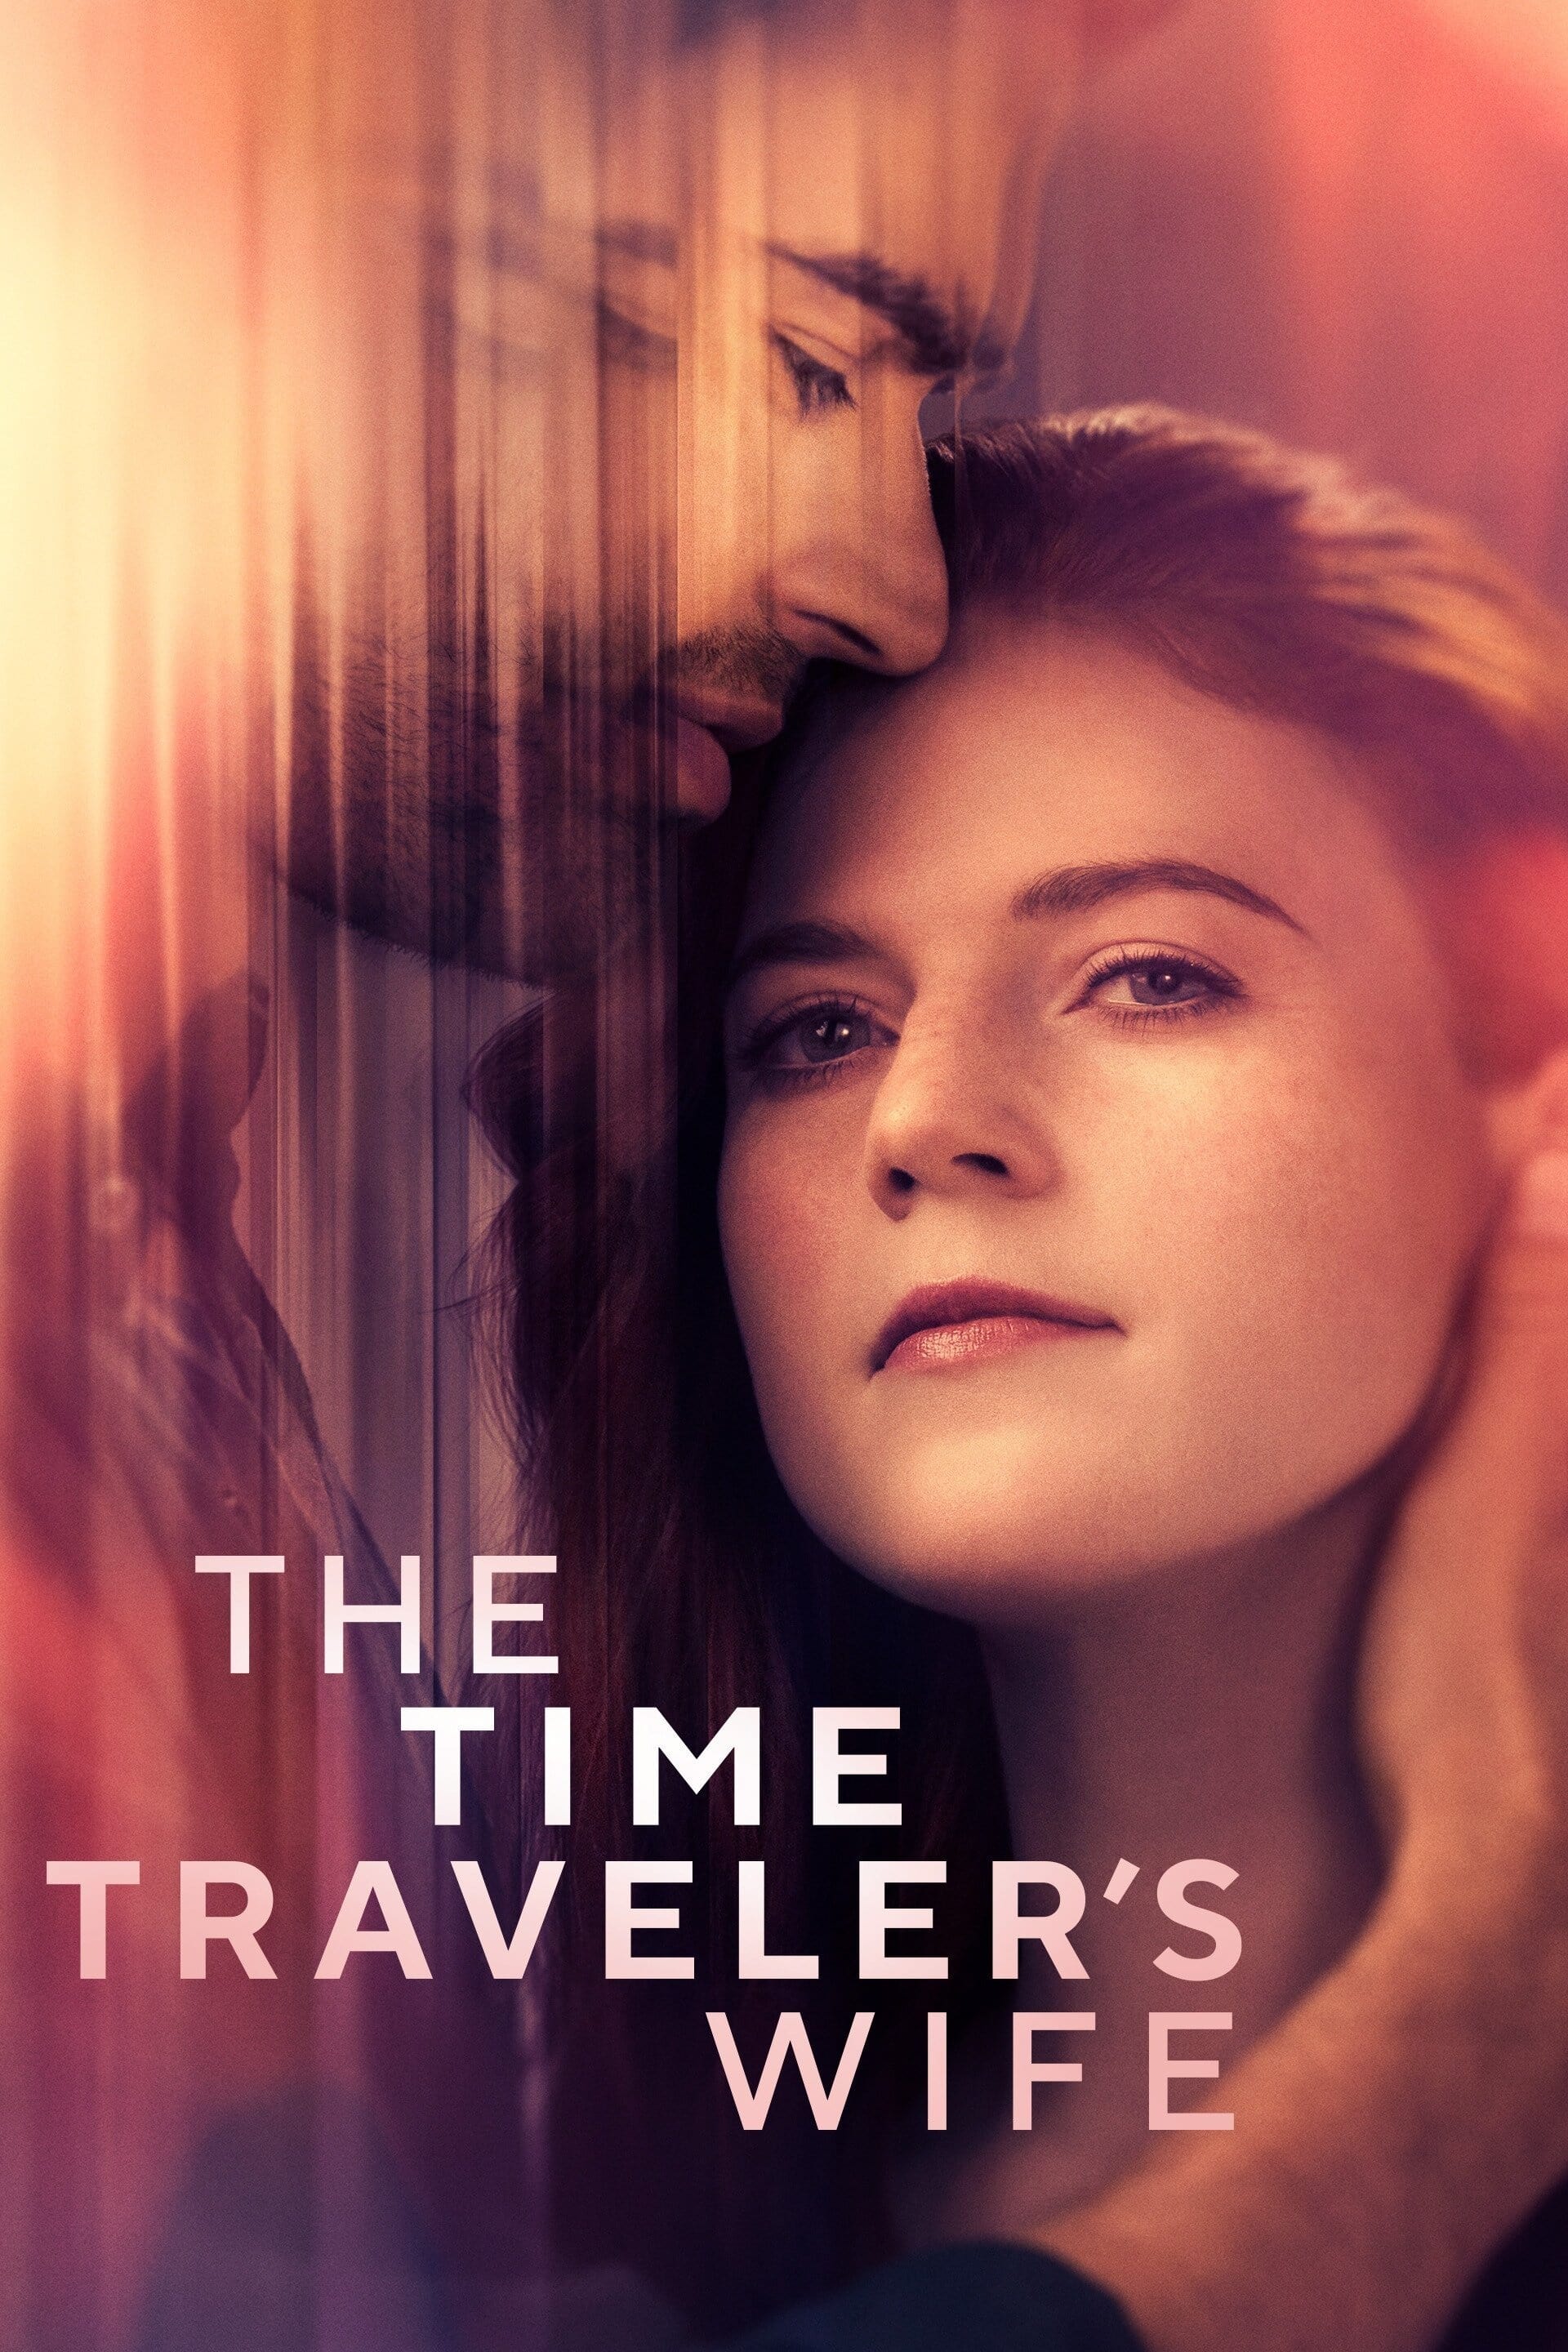 The Time Traveler's Wife (2022)